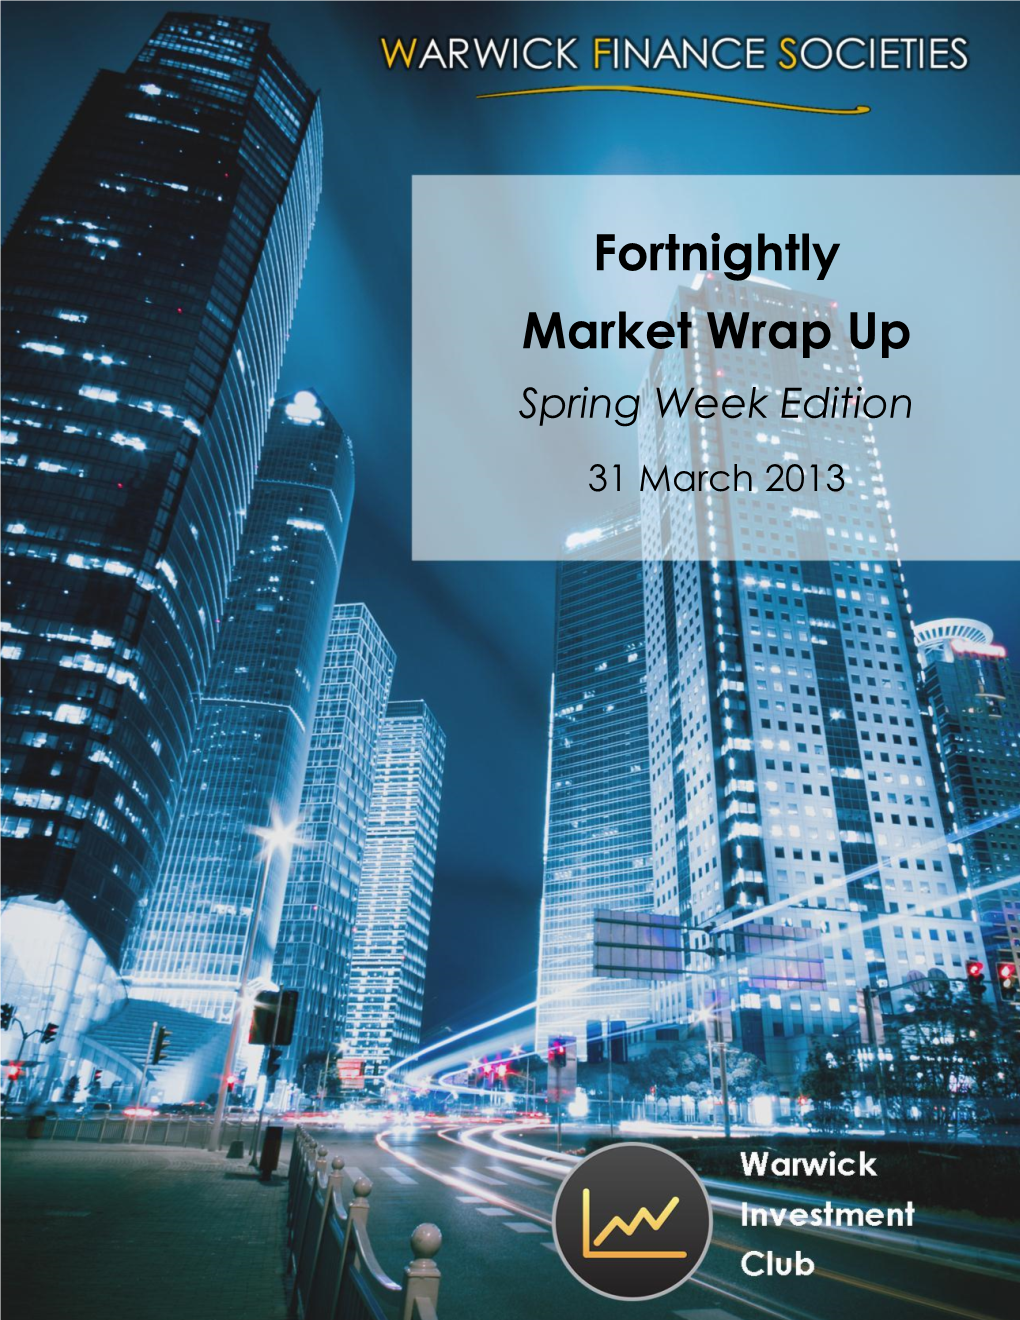 Fortnightly Market Wrap up Spring Week Edition 31 March 2013